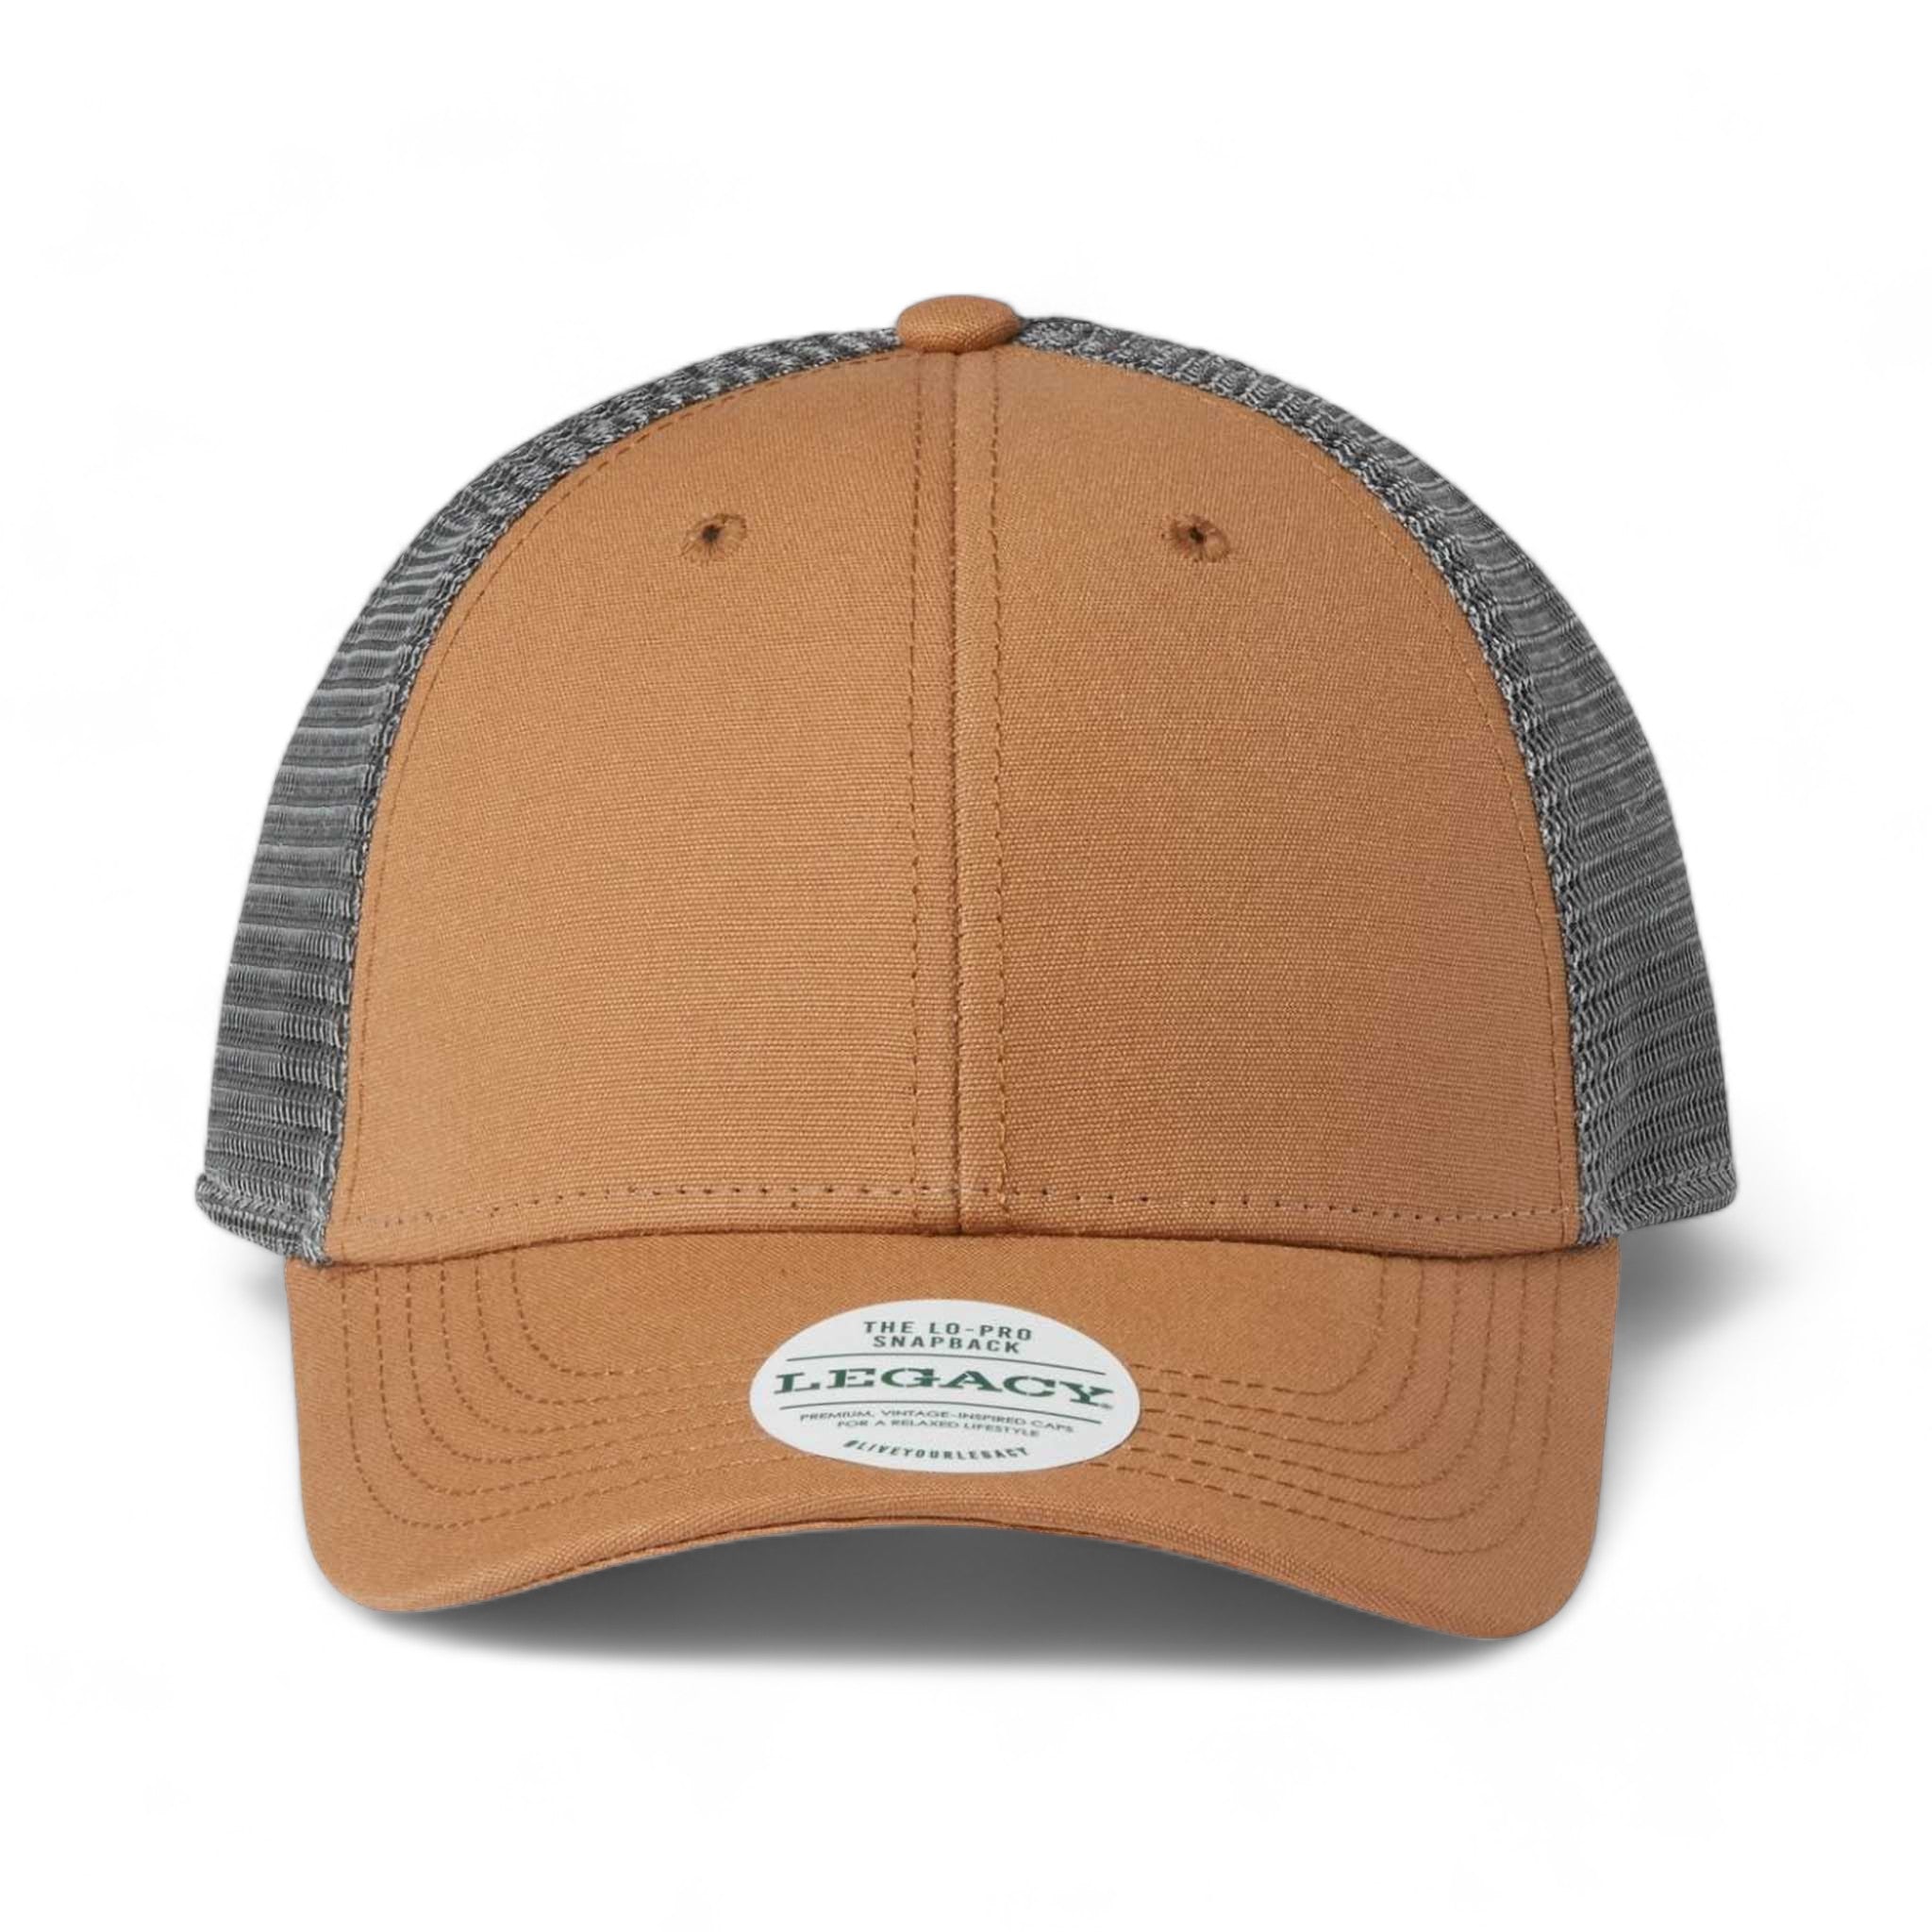 Front view of LEGACY LPS custom hat in caramel and dark grey